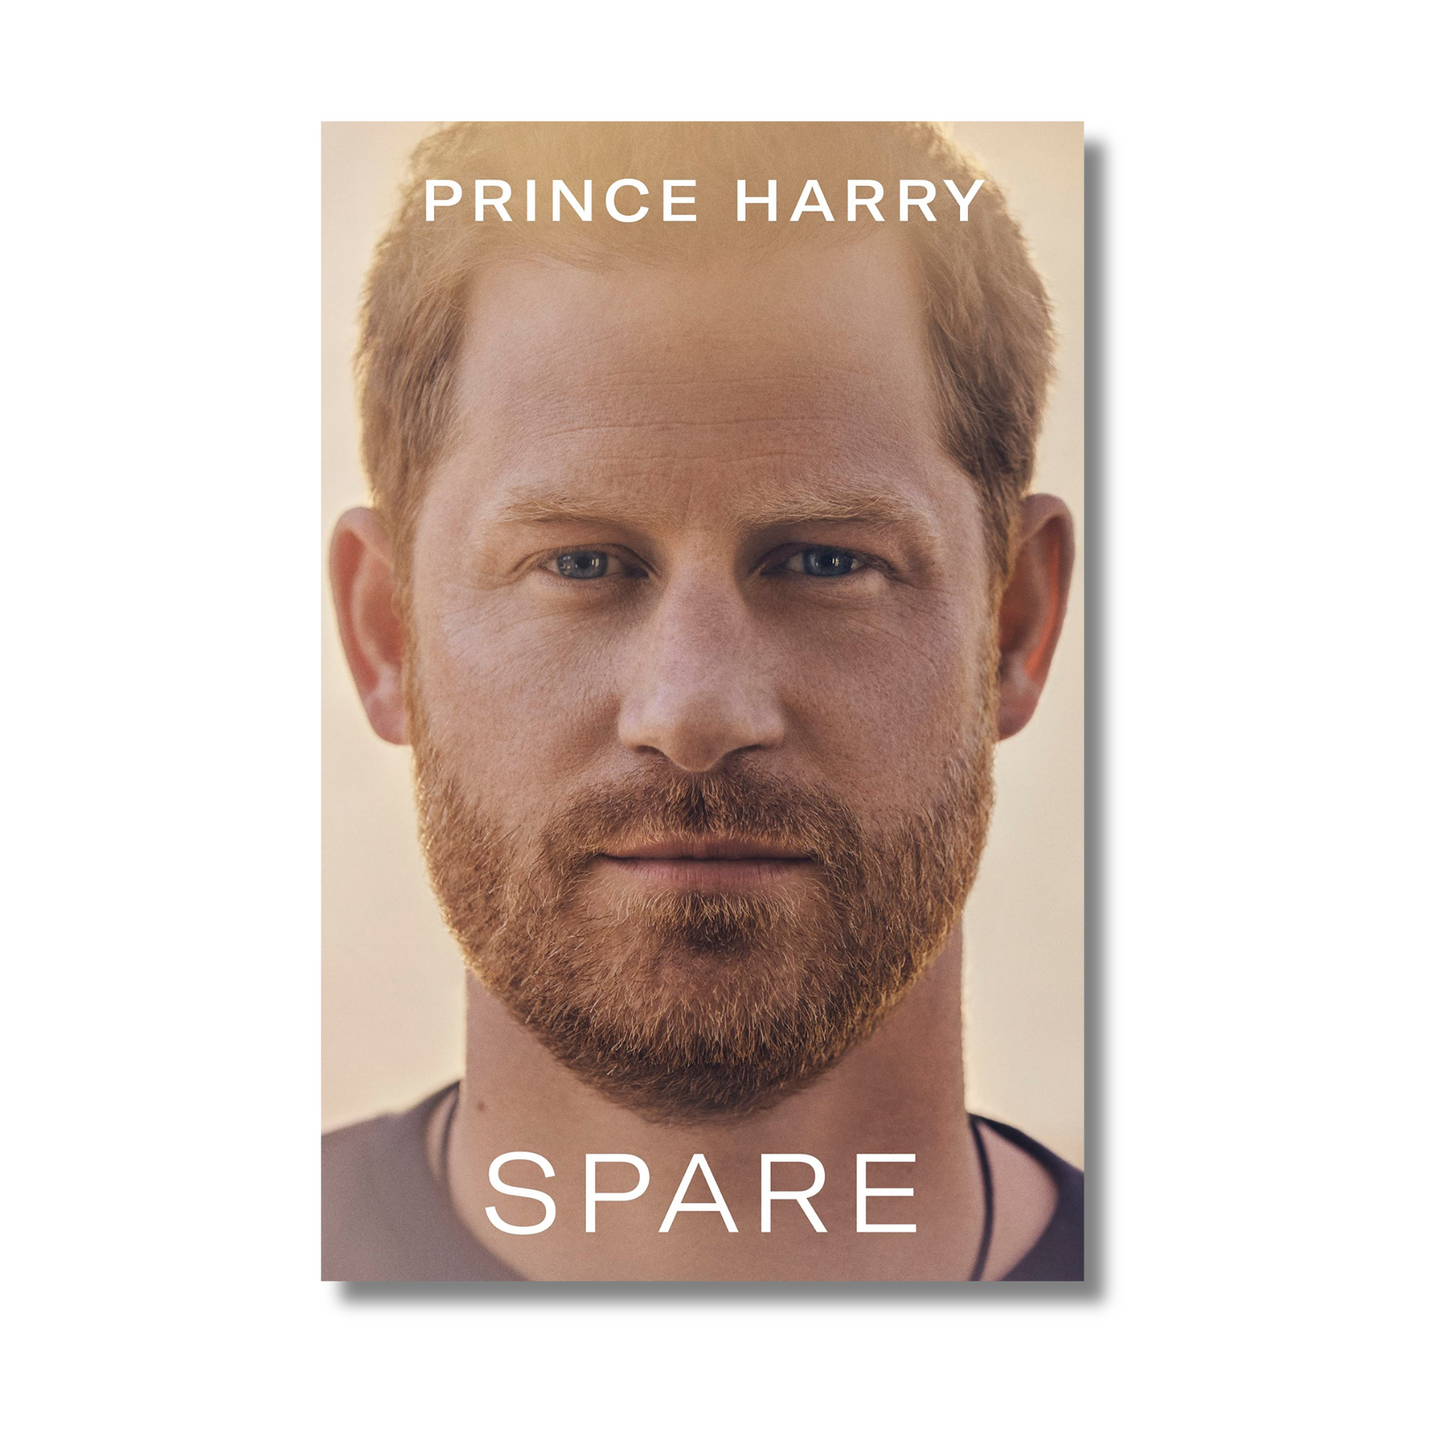 Spare : Prince Harry The Duke of Sussex by Prince Harry (Hardcover)